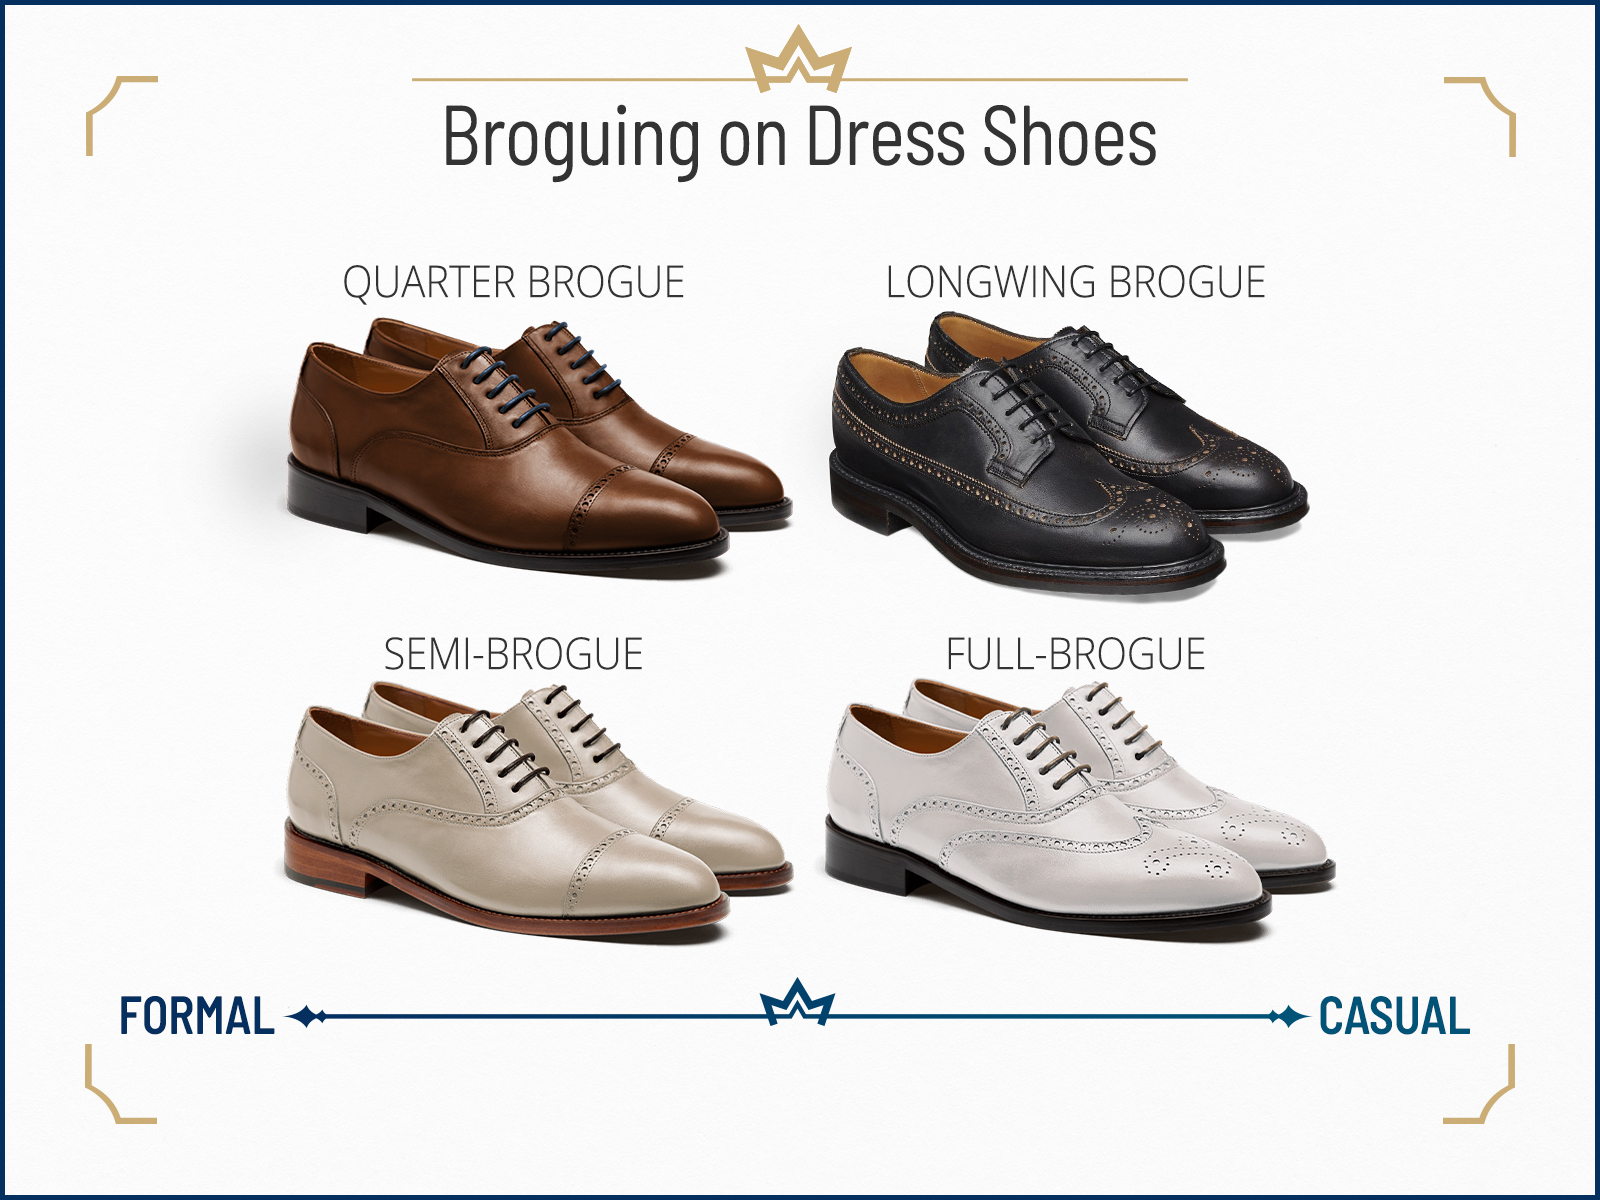 Different broguing dress shoe styles